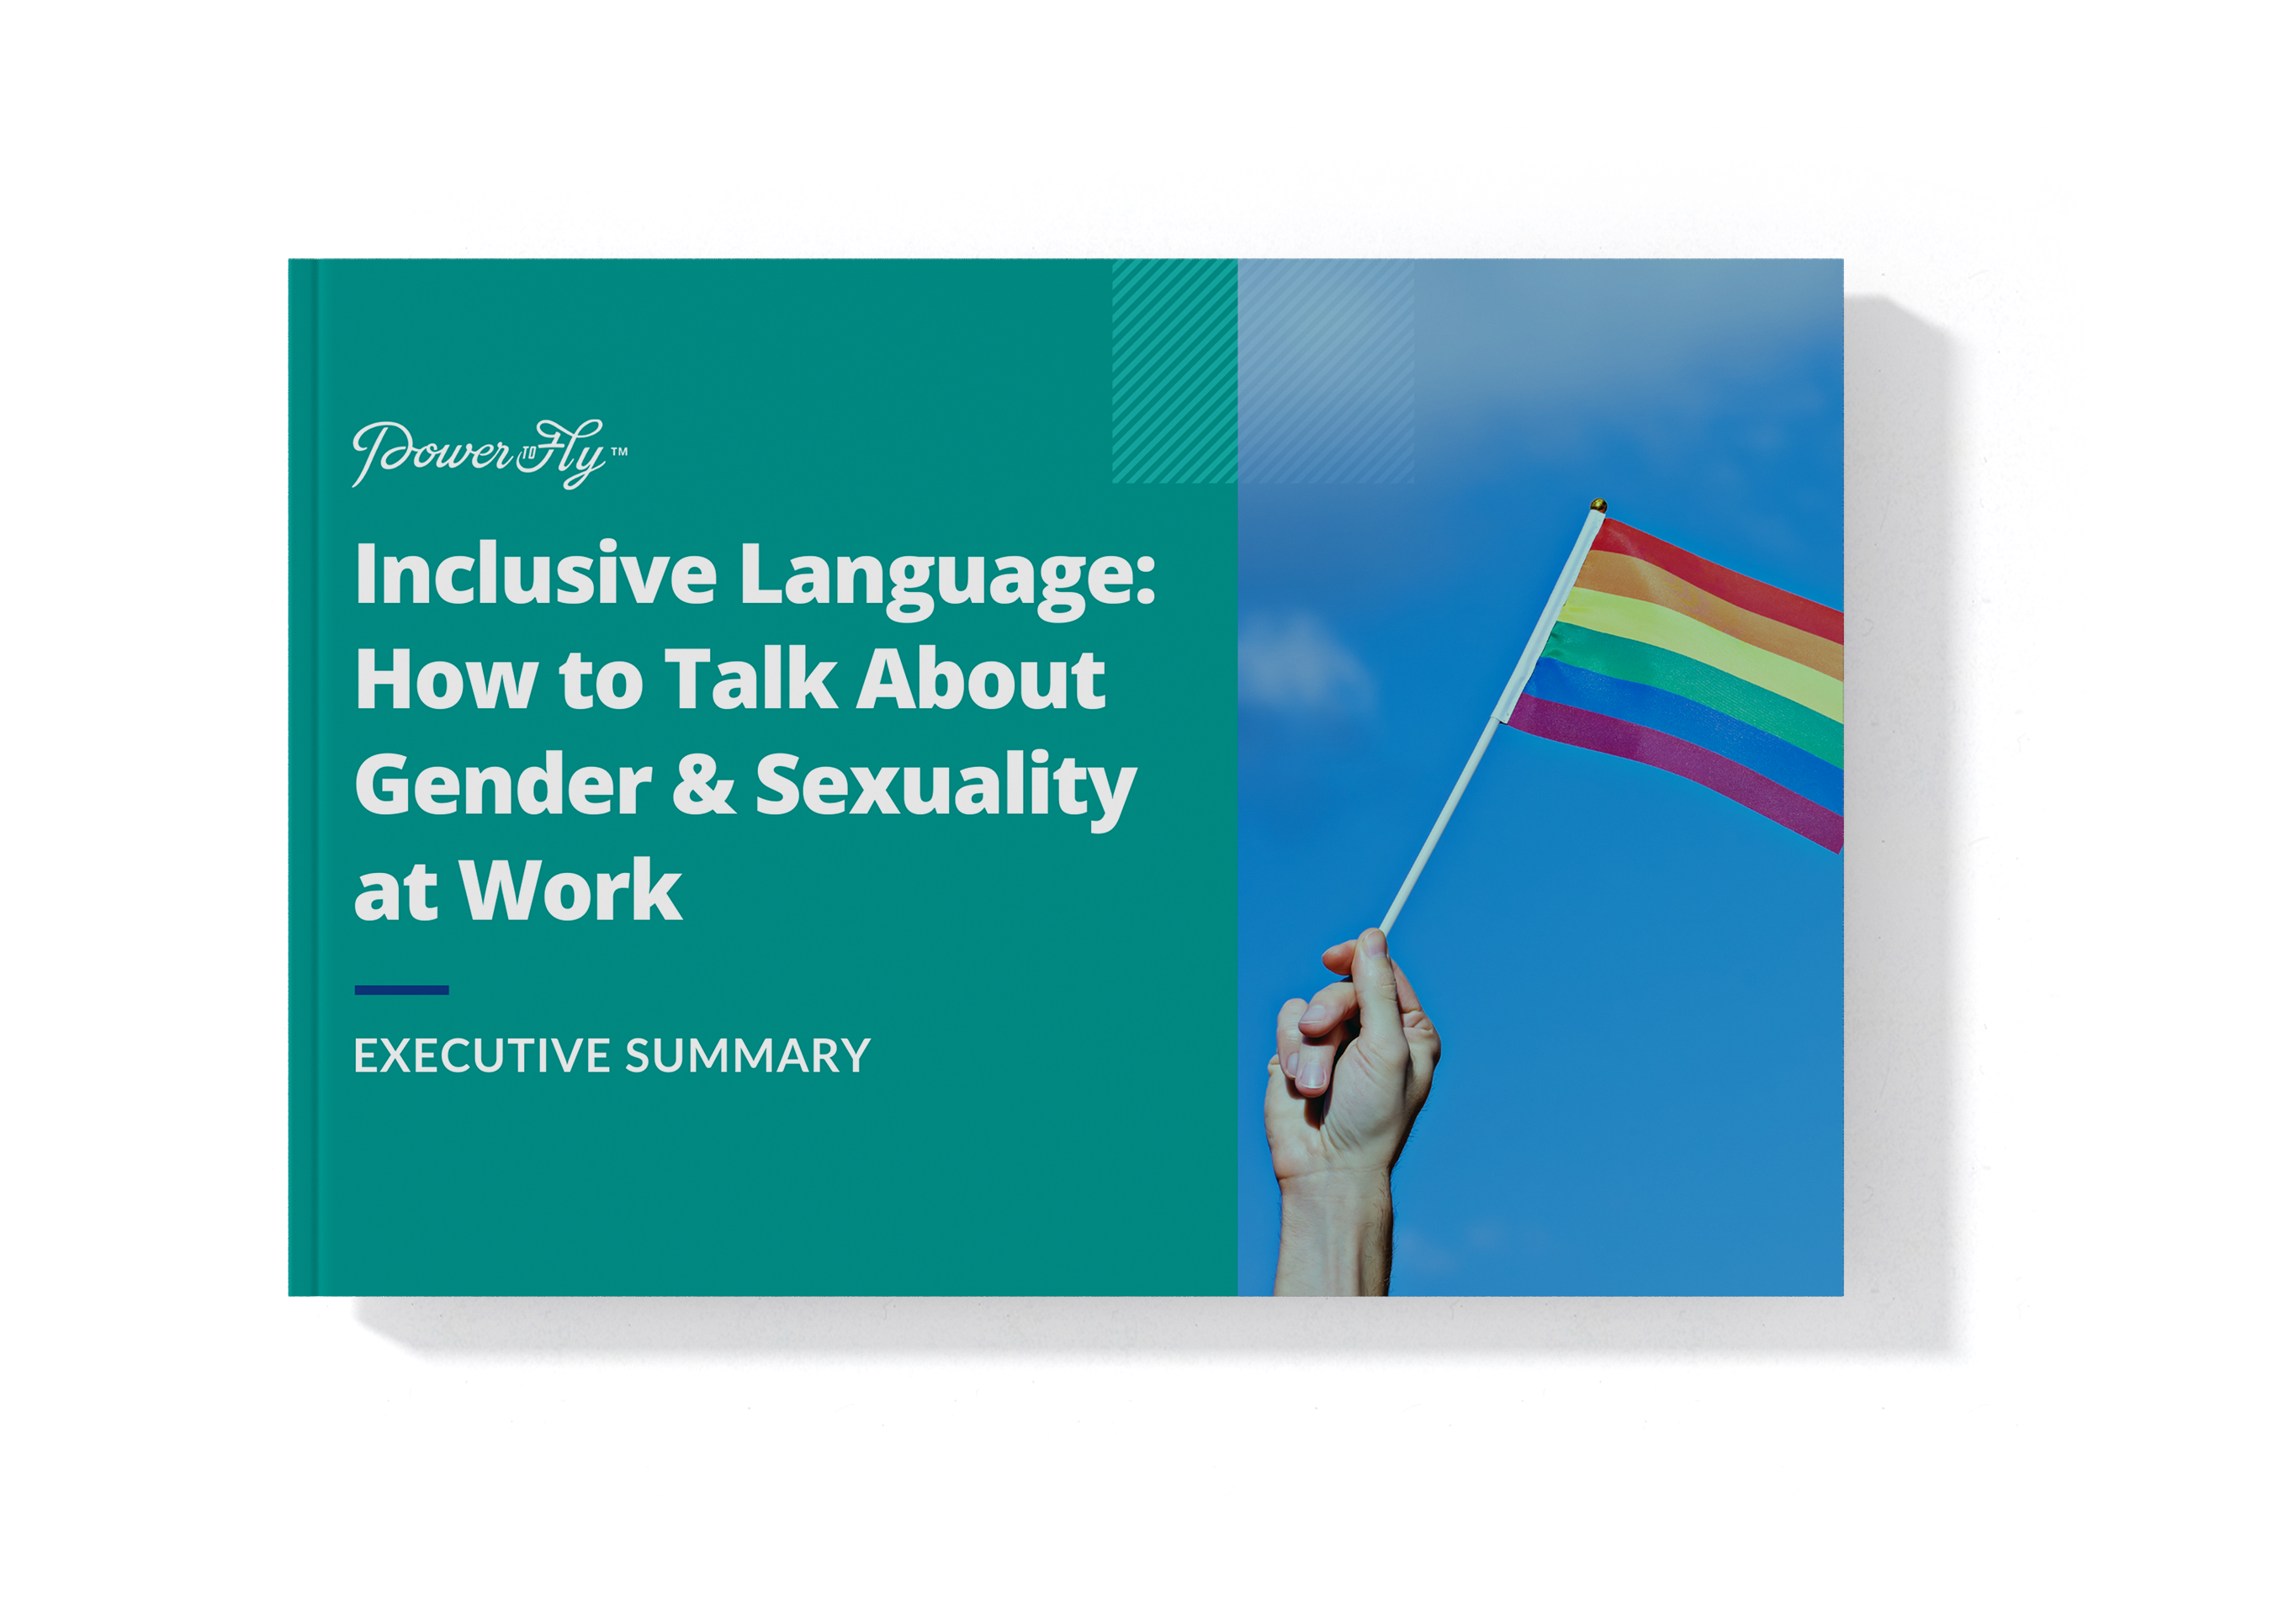 Inclusive Language: How To Talk About Gender & Sexuality at Work